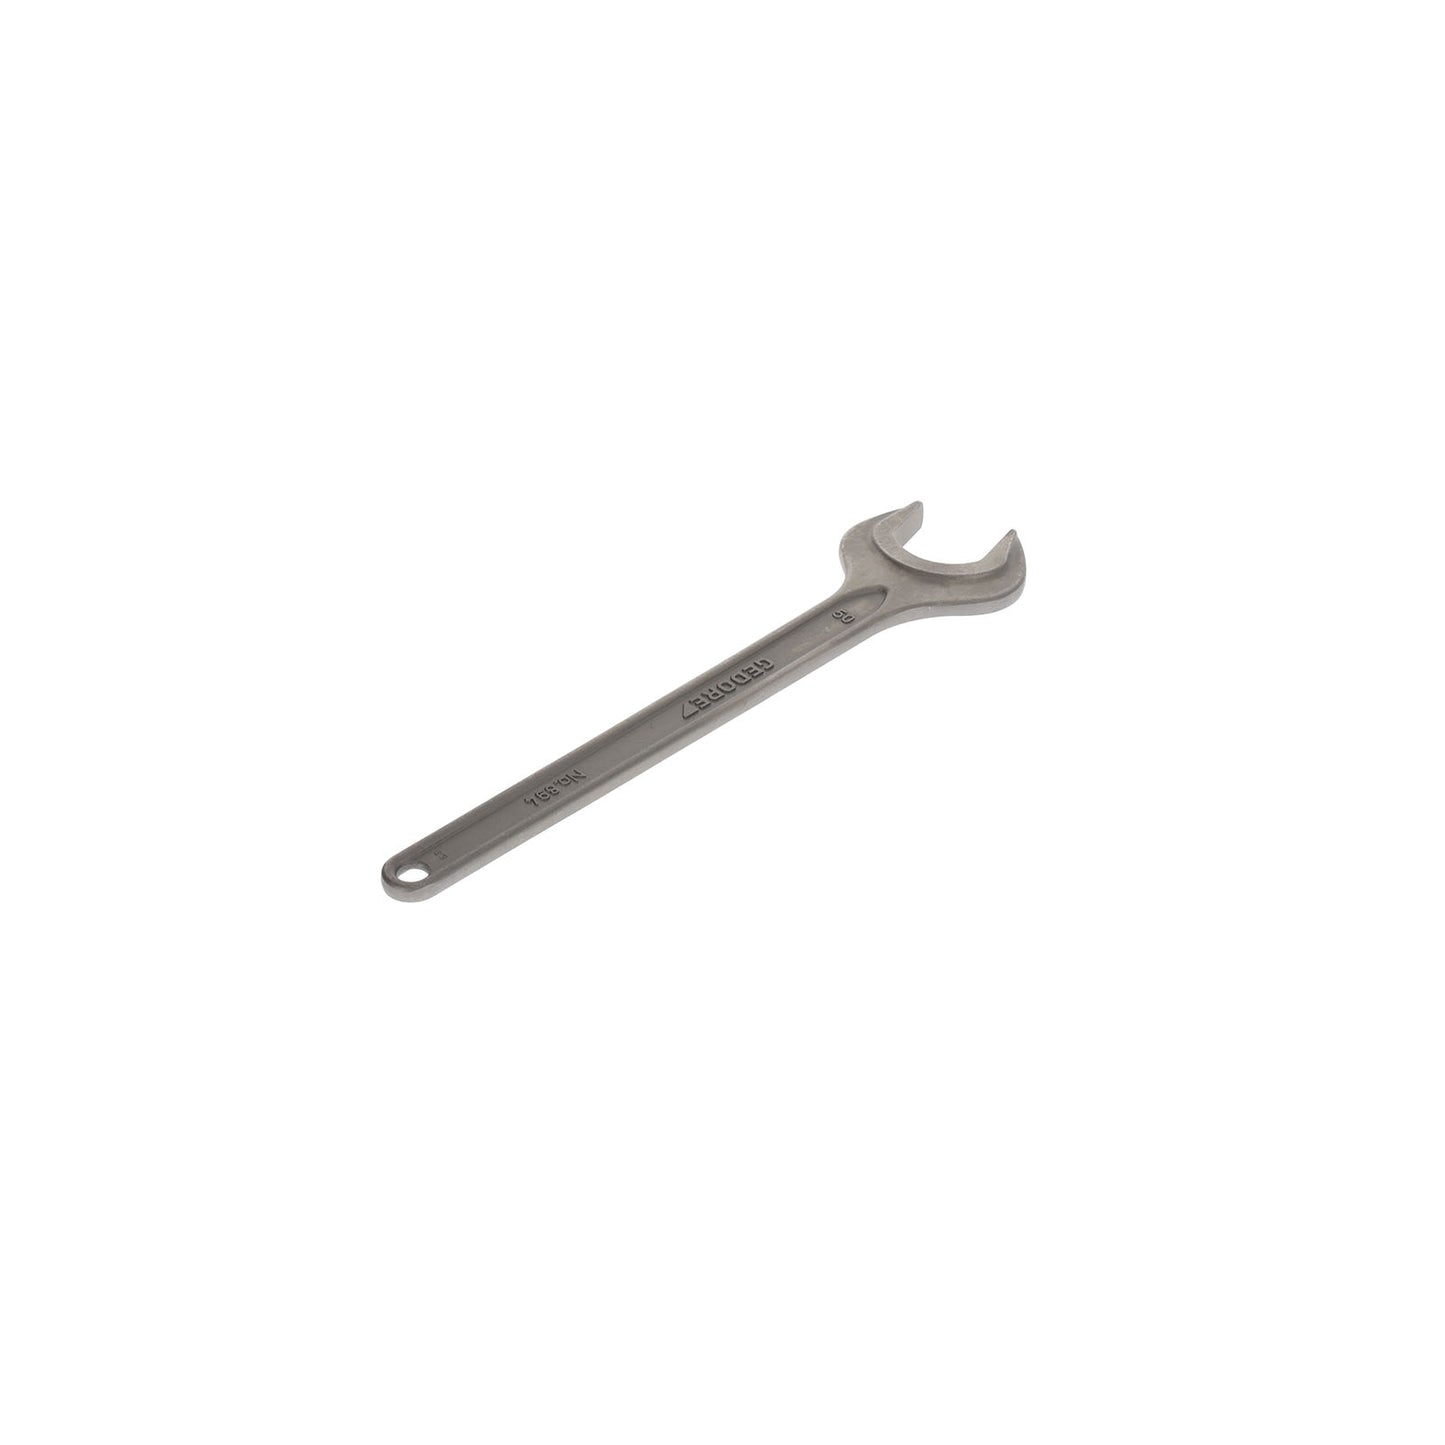 GEDORE 894 50 - 1 Open End Wrench, 50mm (6577190)